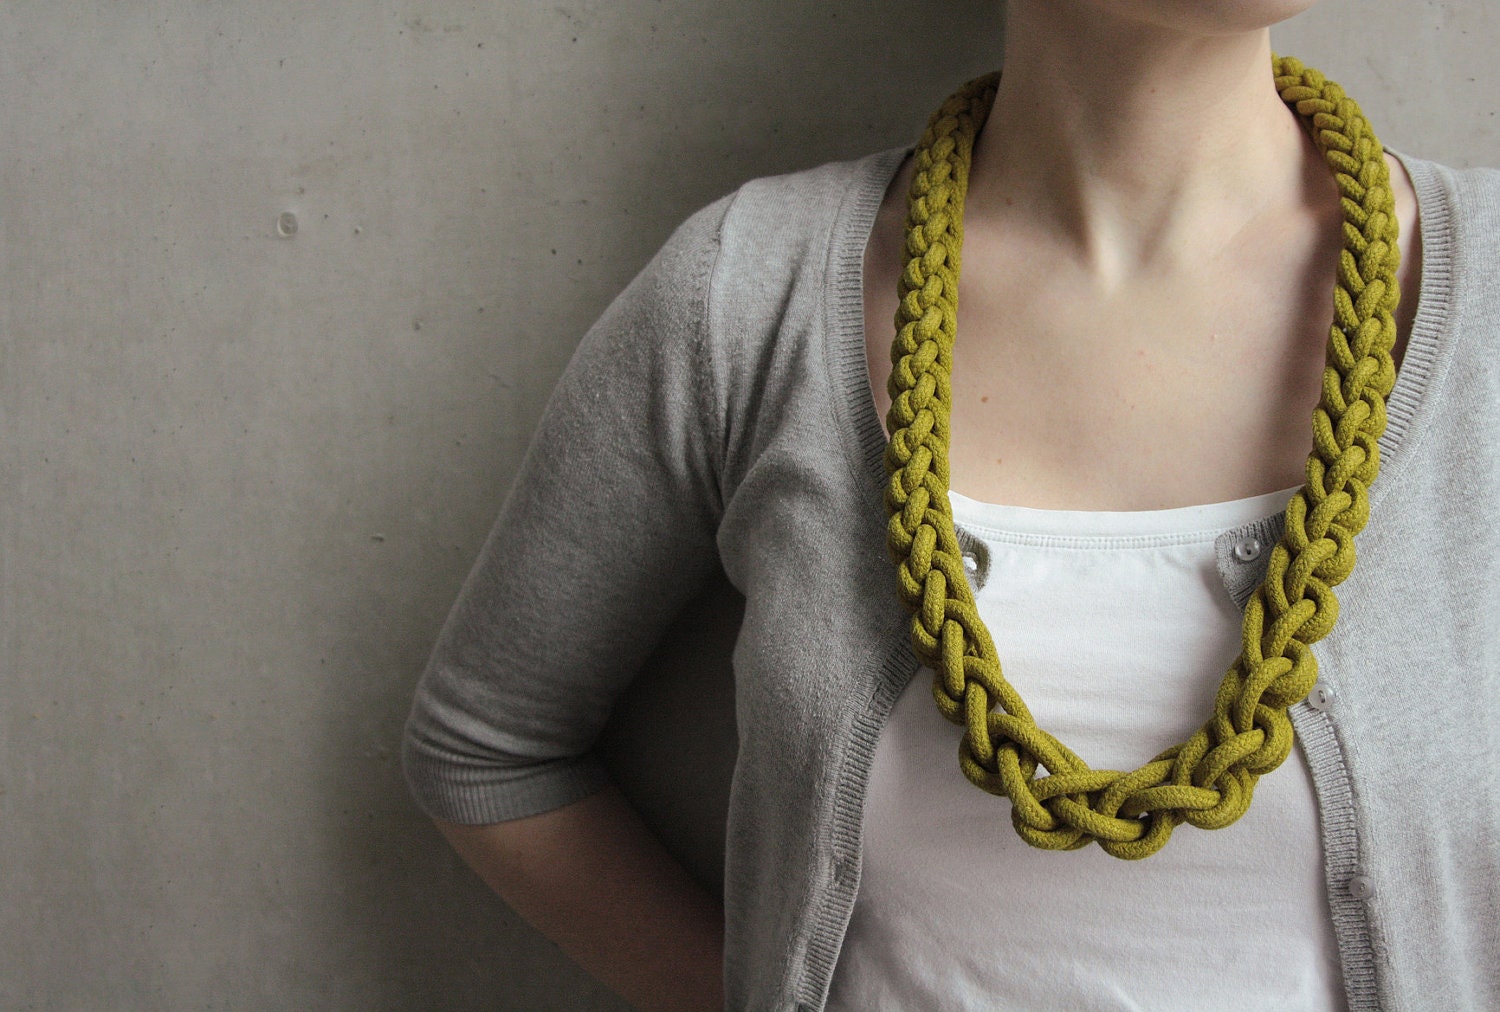 Knotted rope necklace "Rina" in olive green